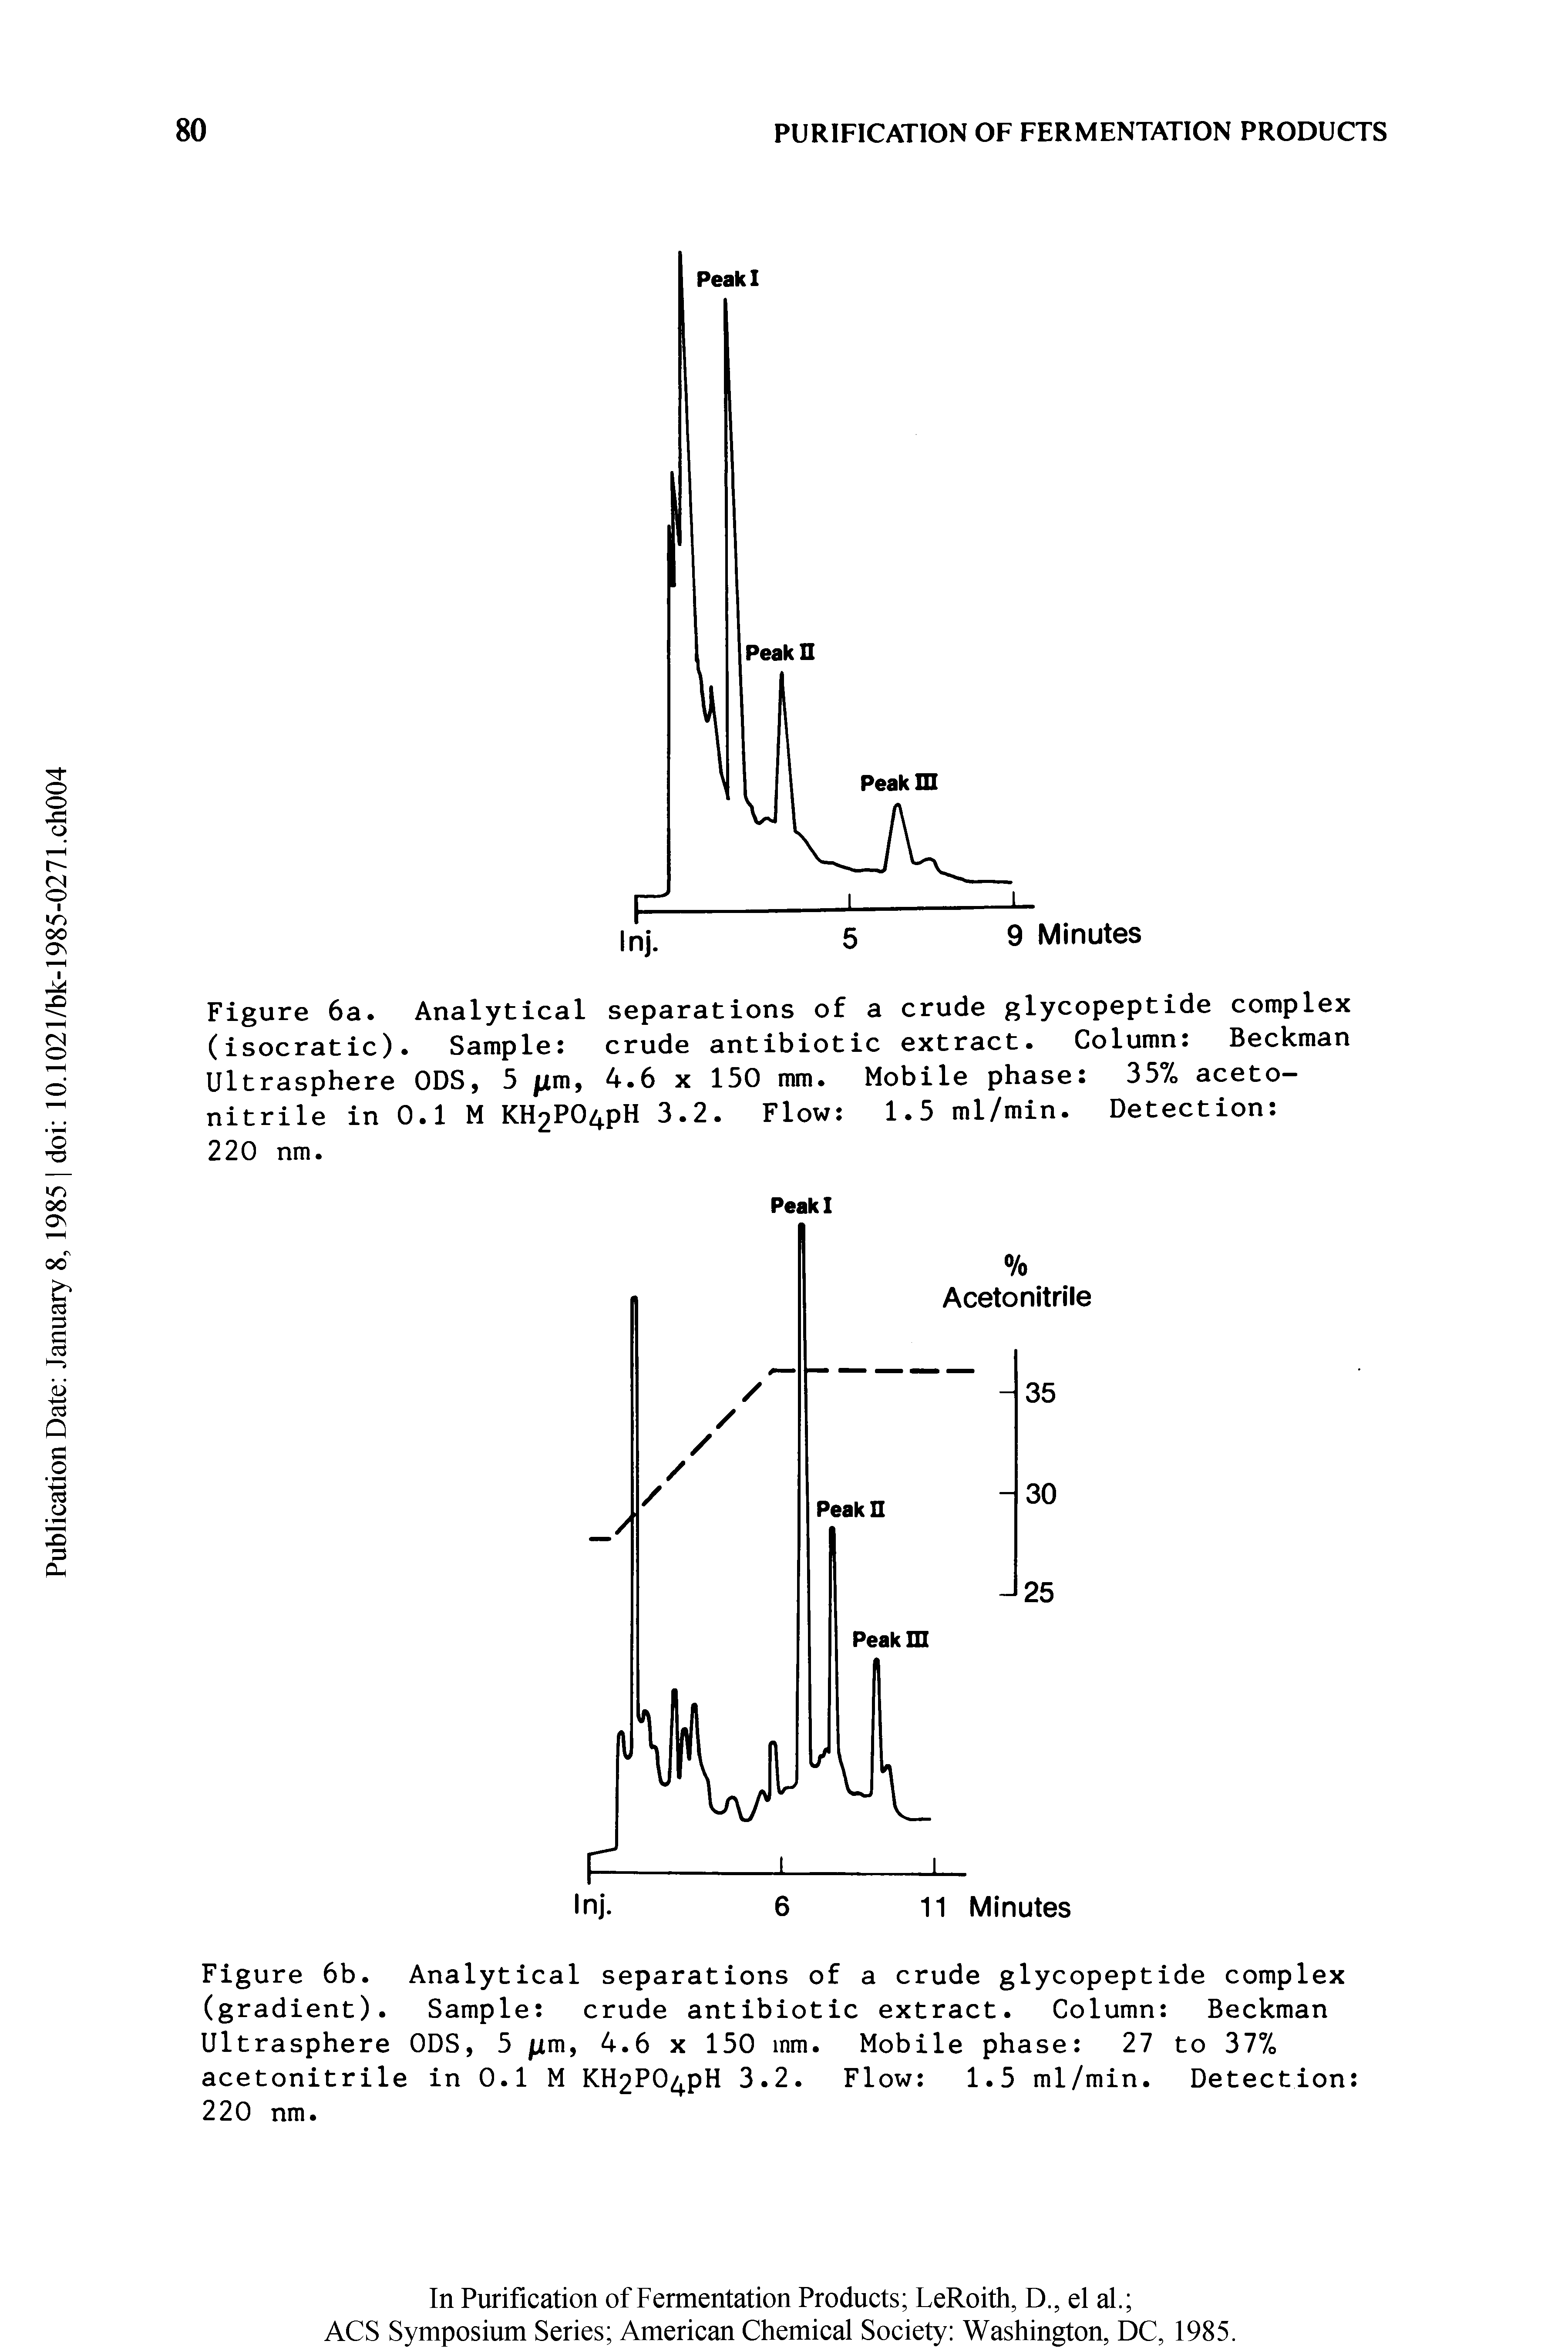 Figure 6b. Analytical separations of a crude glycopeptide complex (gradient). Sample crude antibiotic extract. Column Beckman Ultrasphere ODS, 5 pirn, 4.6 x 150 inm. Mobile phase 27 to 37% acetonitrile in 0.1 M KH2PO4PH 3.2. Flow 1.5 ml/min. Detection 220 nm.